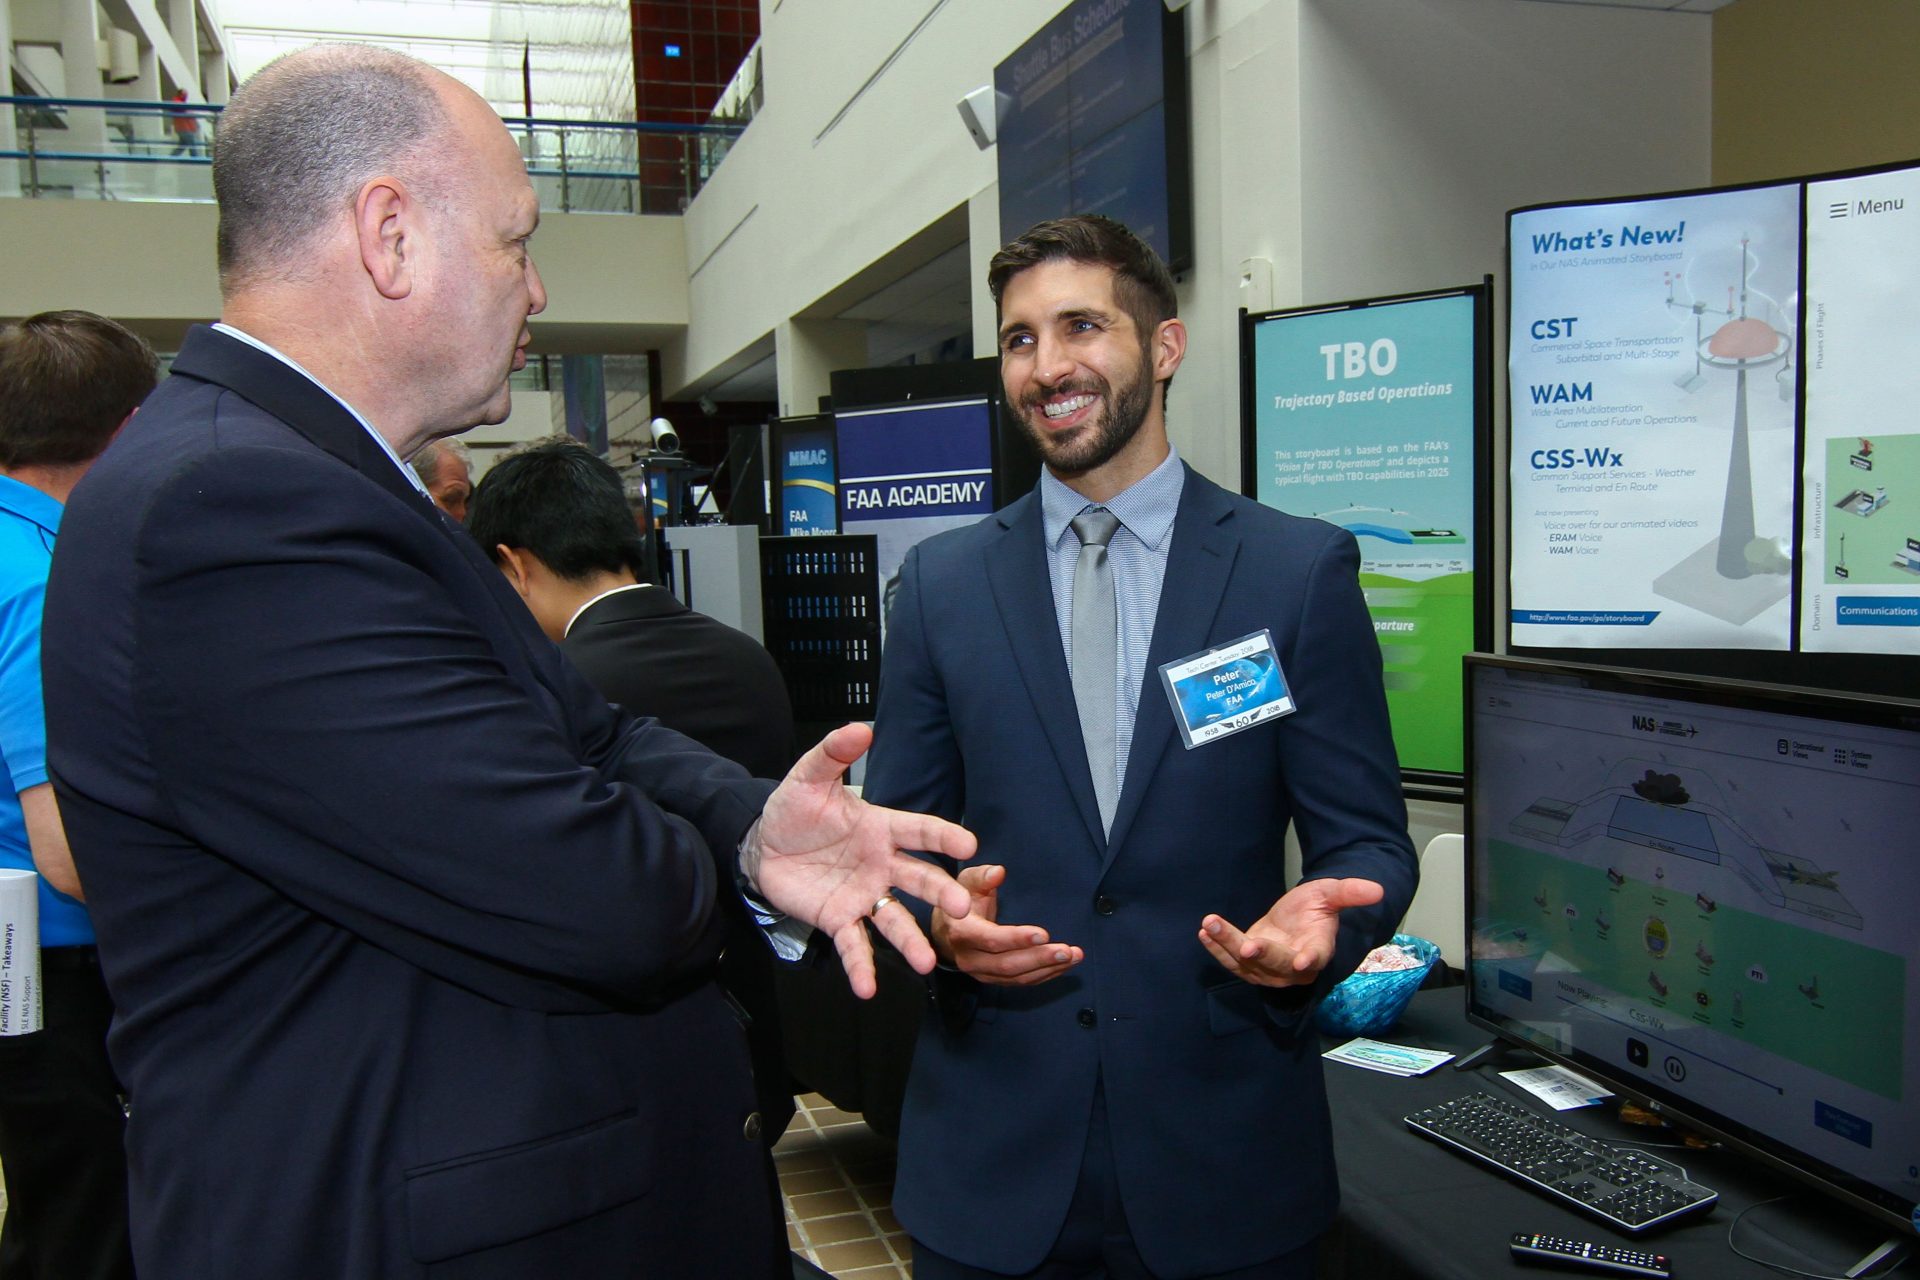 Rowan College of Engineering alumnus Peter D'Amico (pictured at right)